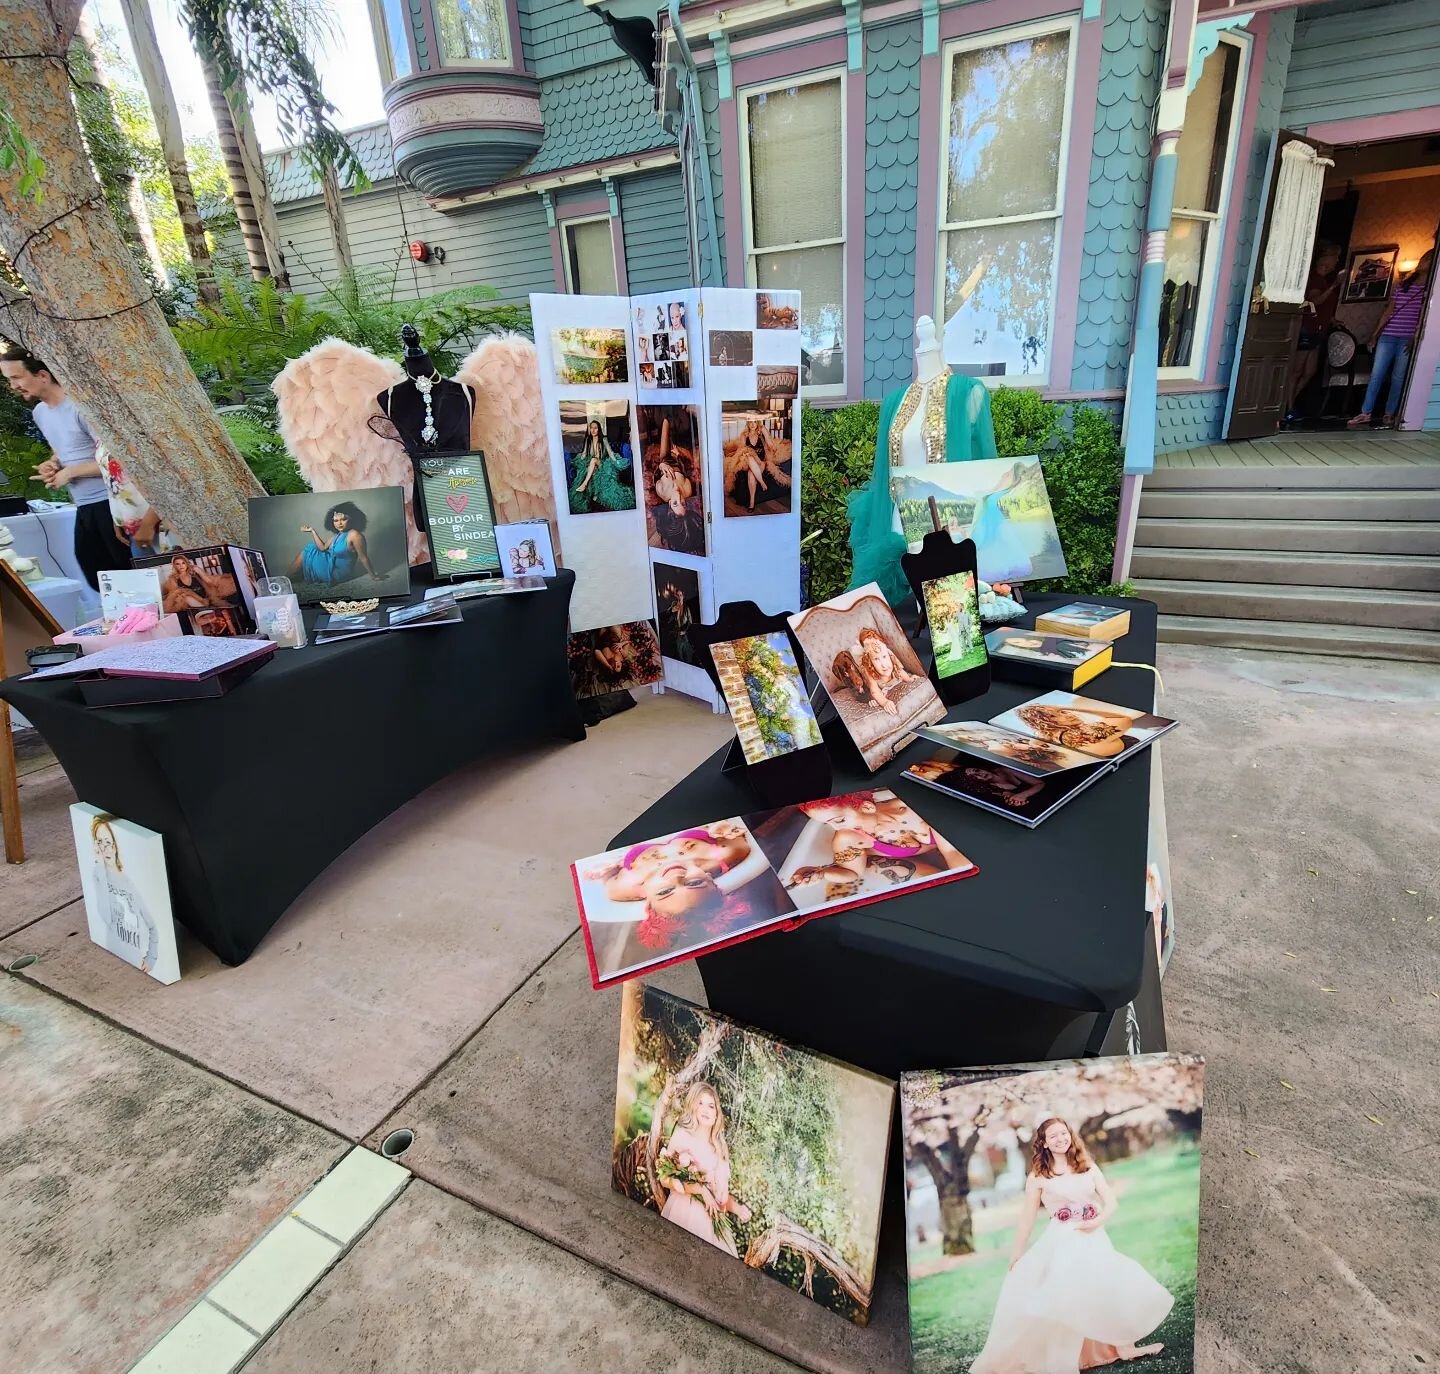 Hanging at the Citrus Blossom Market at Edwards Mansion in Redlands! The sun is shining, birds are singing, the smell of orange trees and jasmine in the air...

#sindea #boudoir #photostudio #socalphotographer #redlandsphotographer #iephotographer